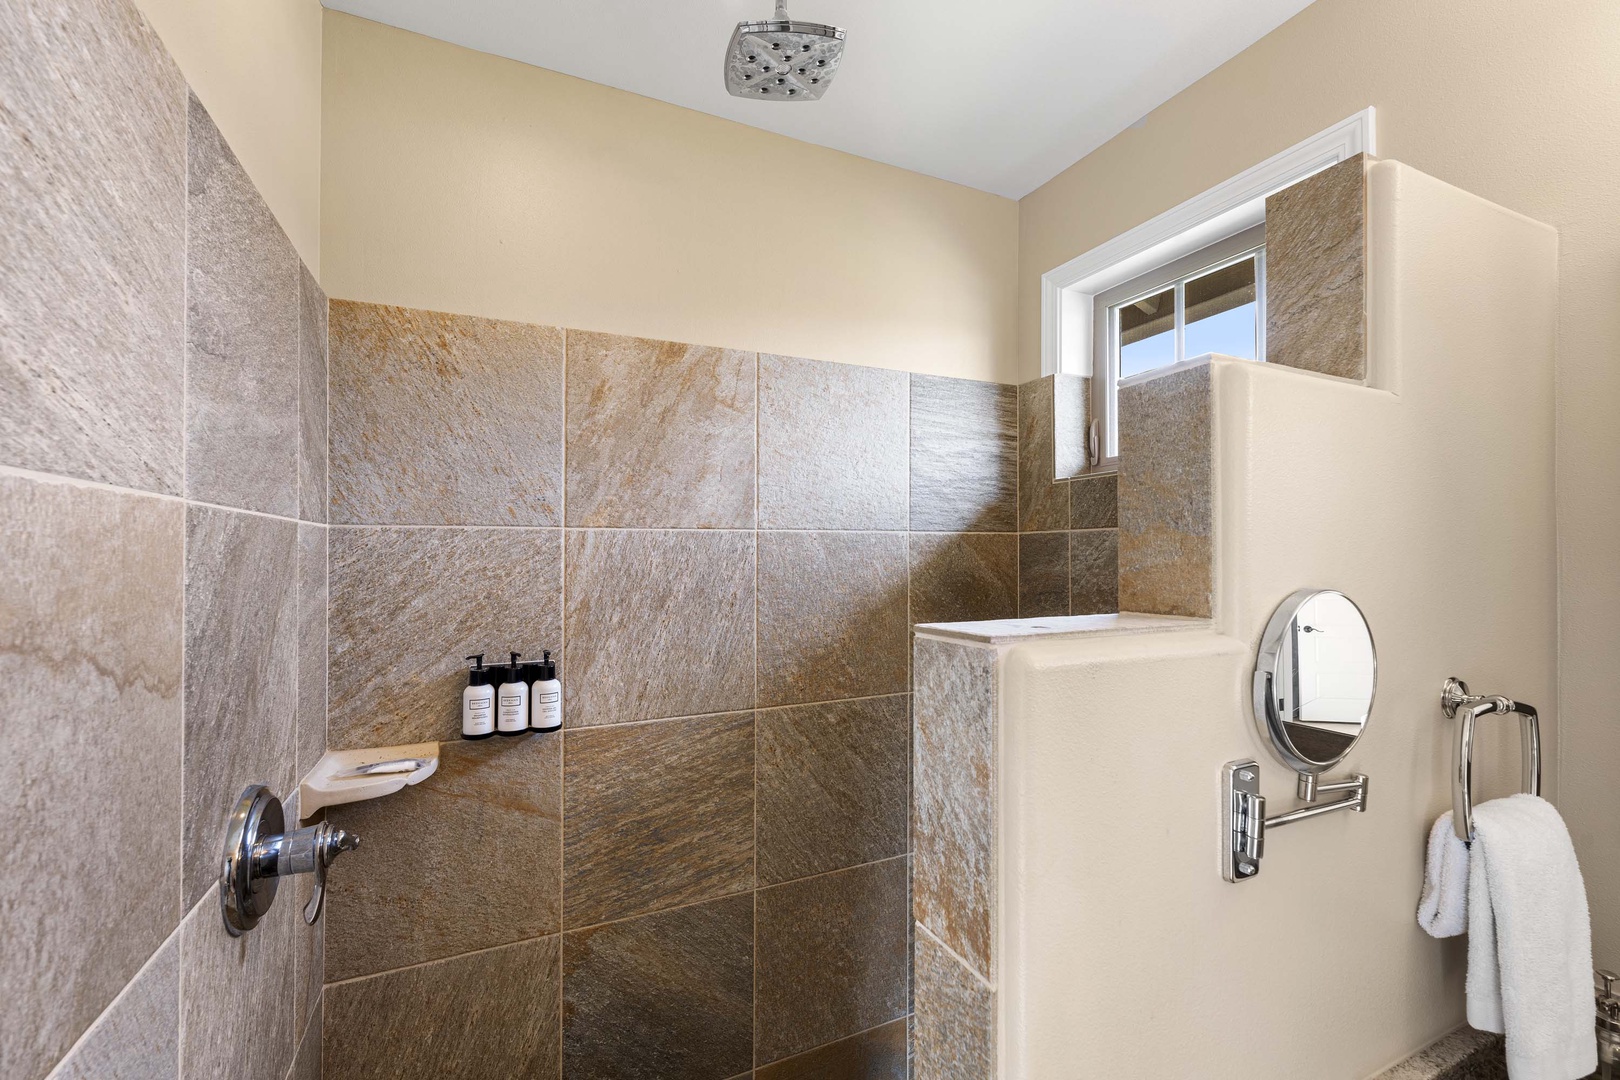 Kailua Kona Vacation Rentals, Holua Kai #27 - Rain style shower in the tiled walk in shower is perfect to relax after a day at the beach or at the pool